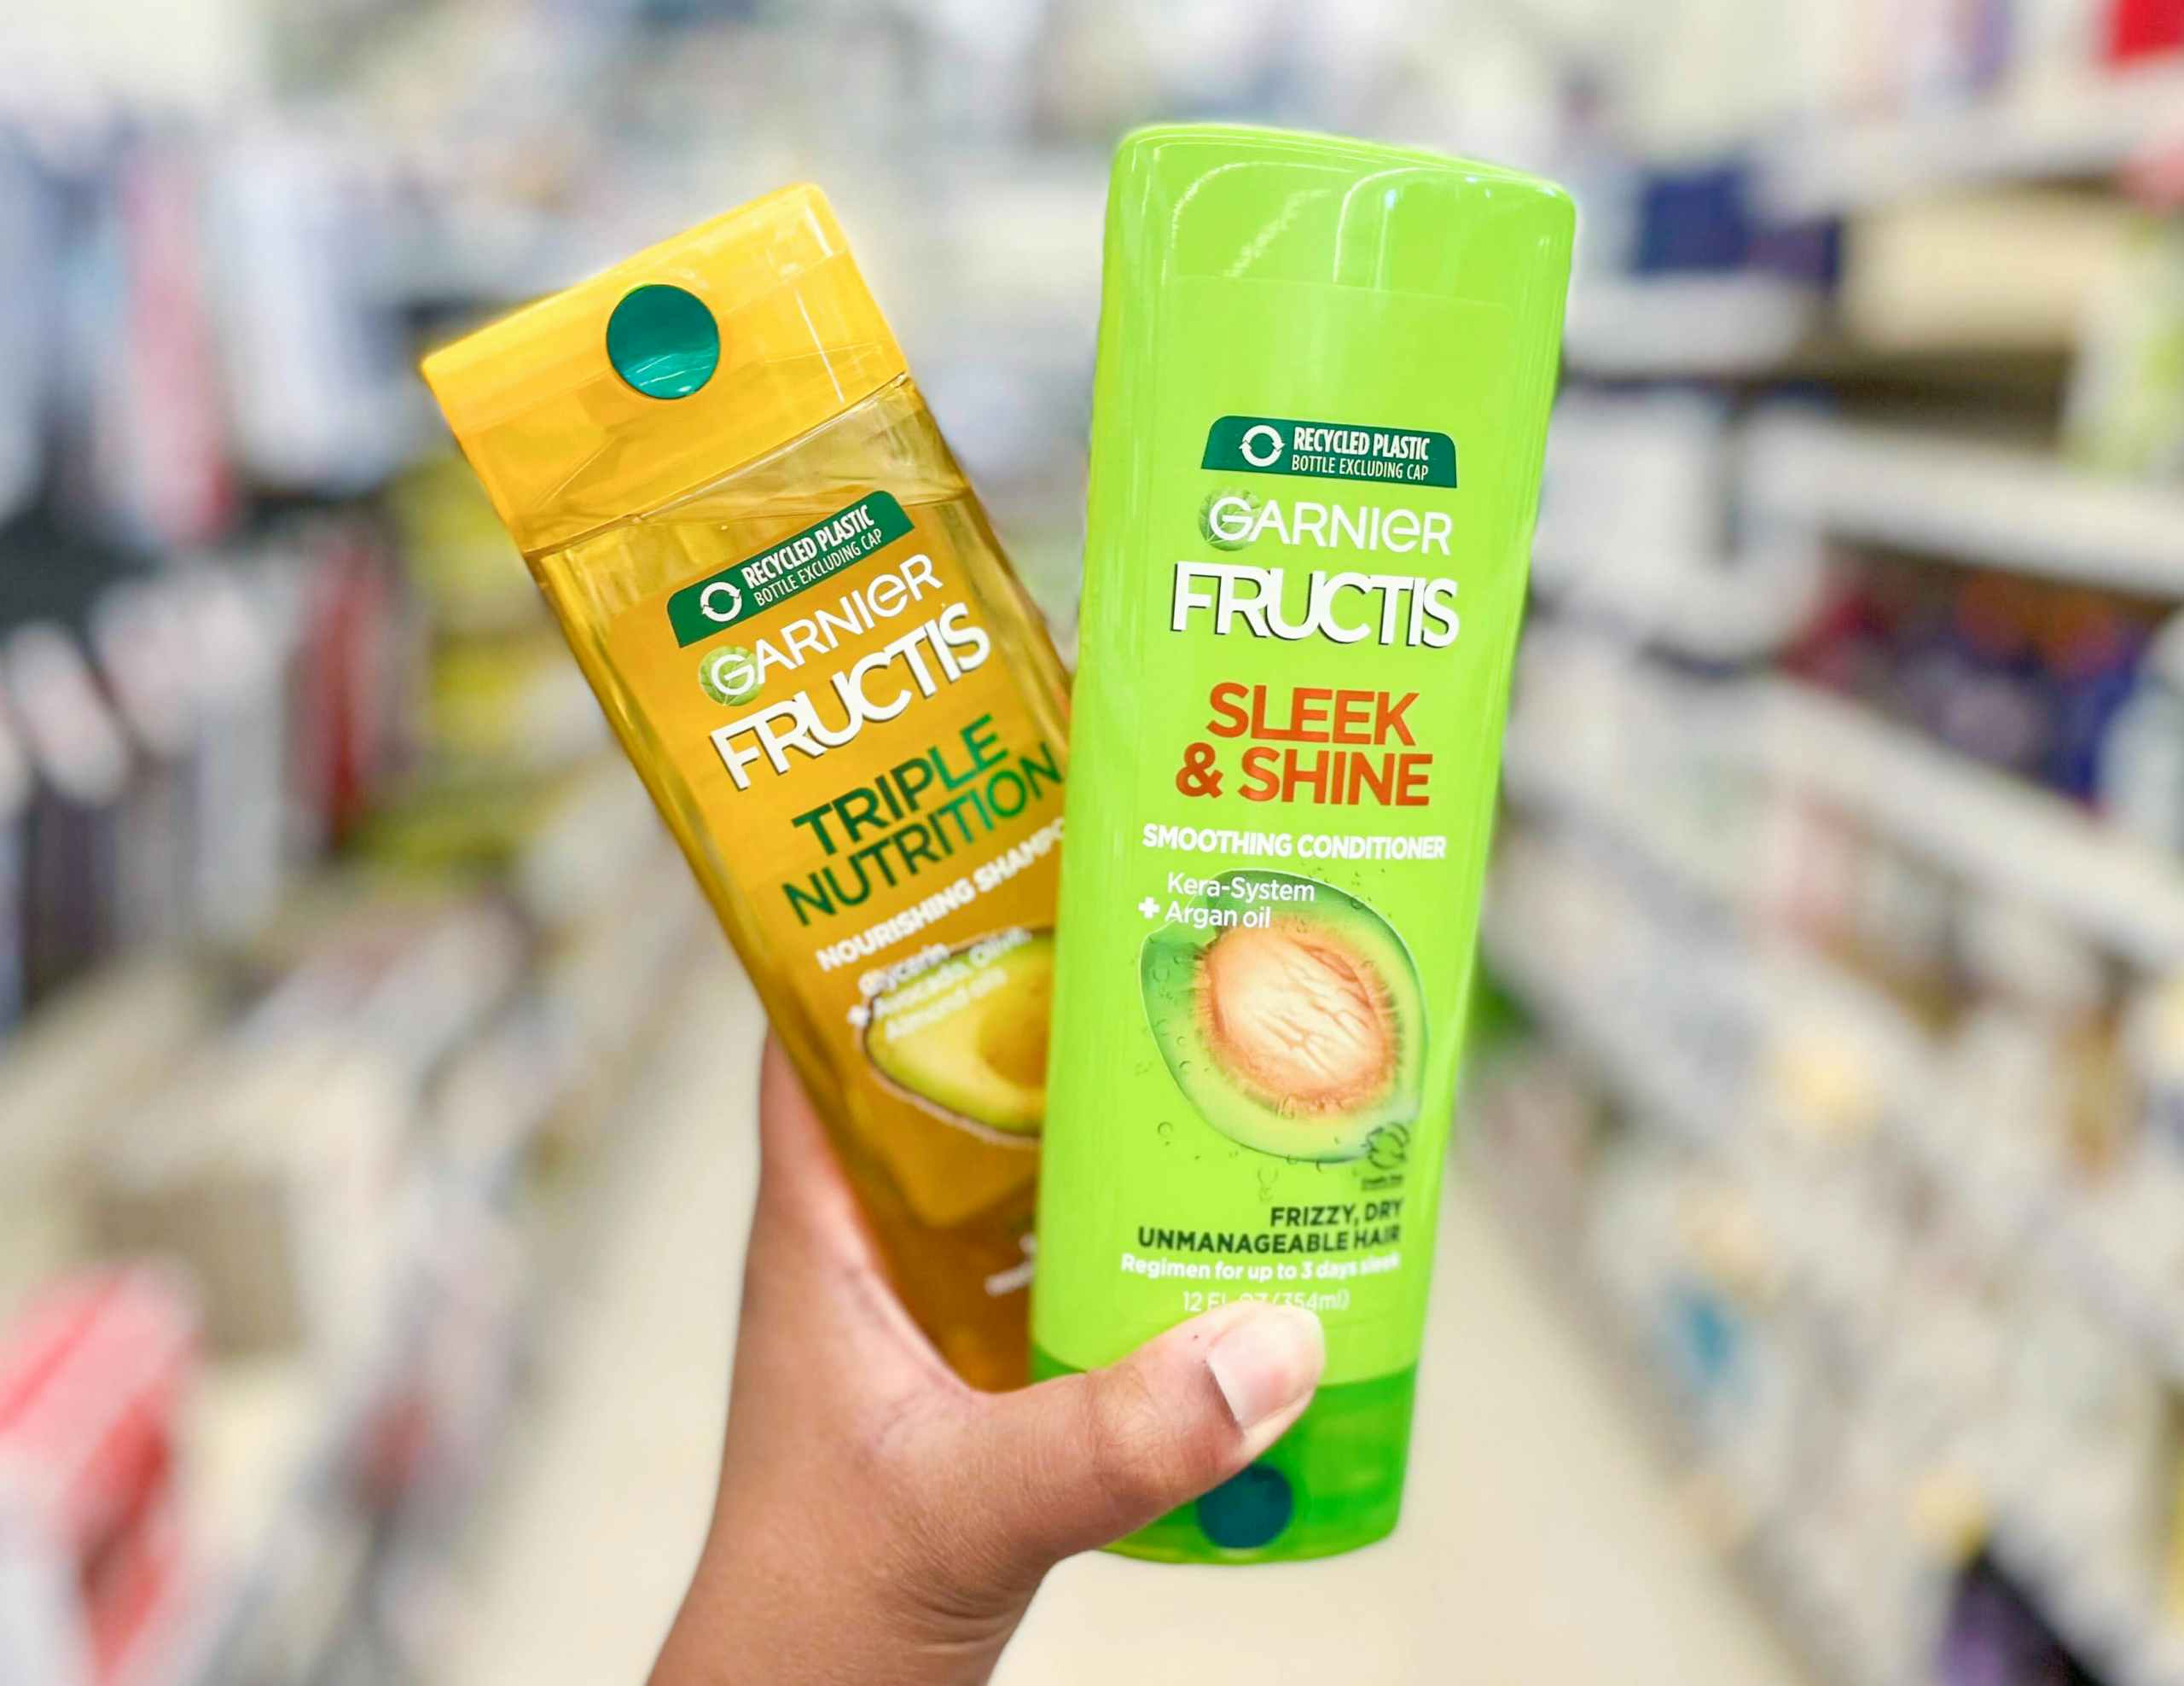 hand holding two bottles of Garnier Fructis shampoo & conditioner in aisle